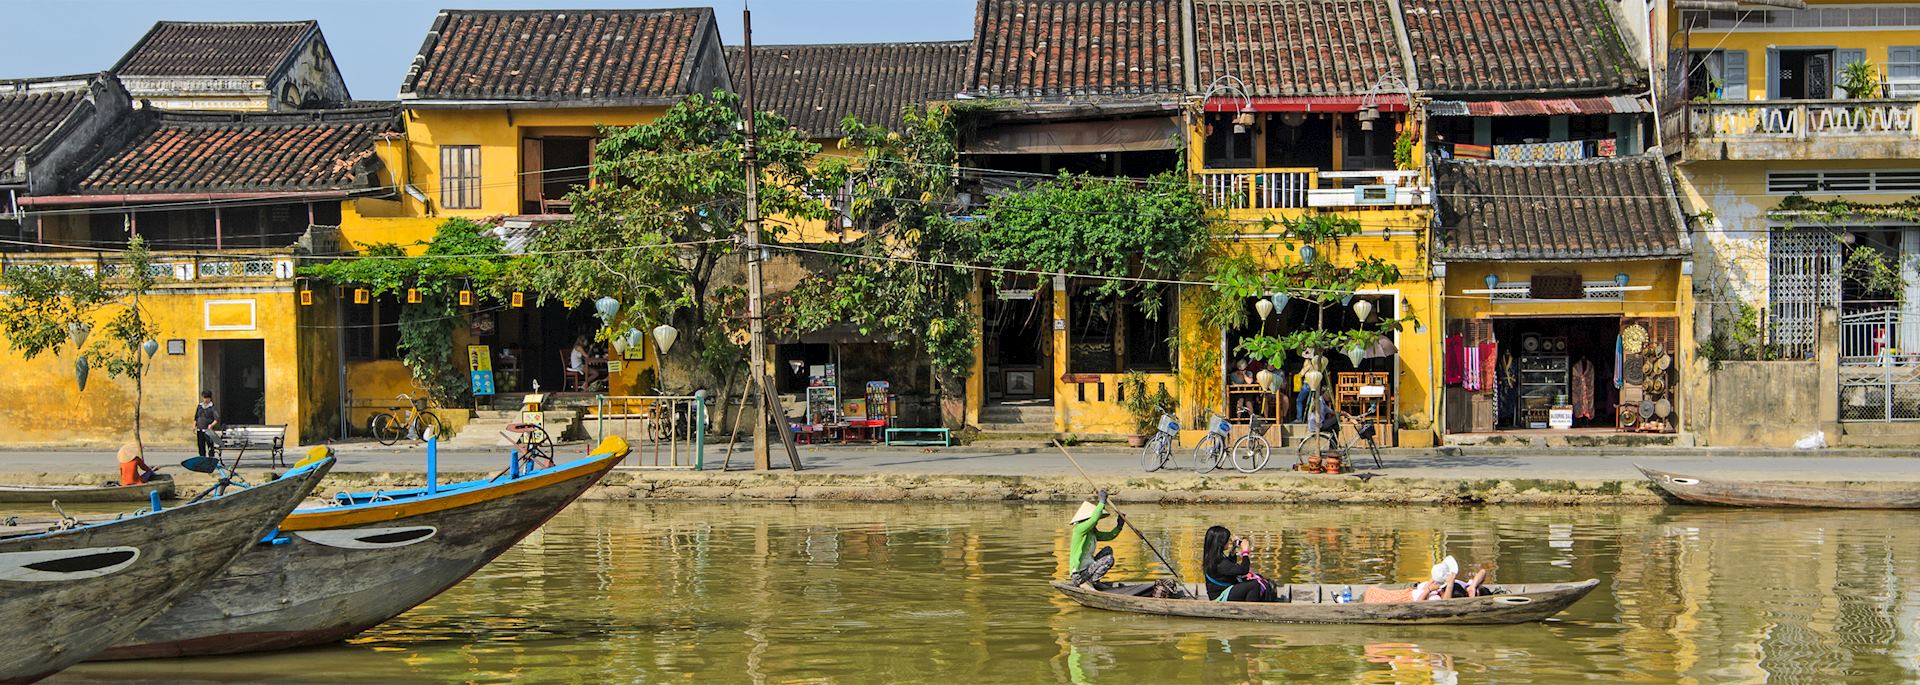 Waterfront, Hoi An